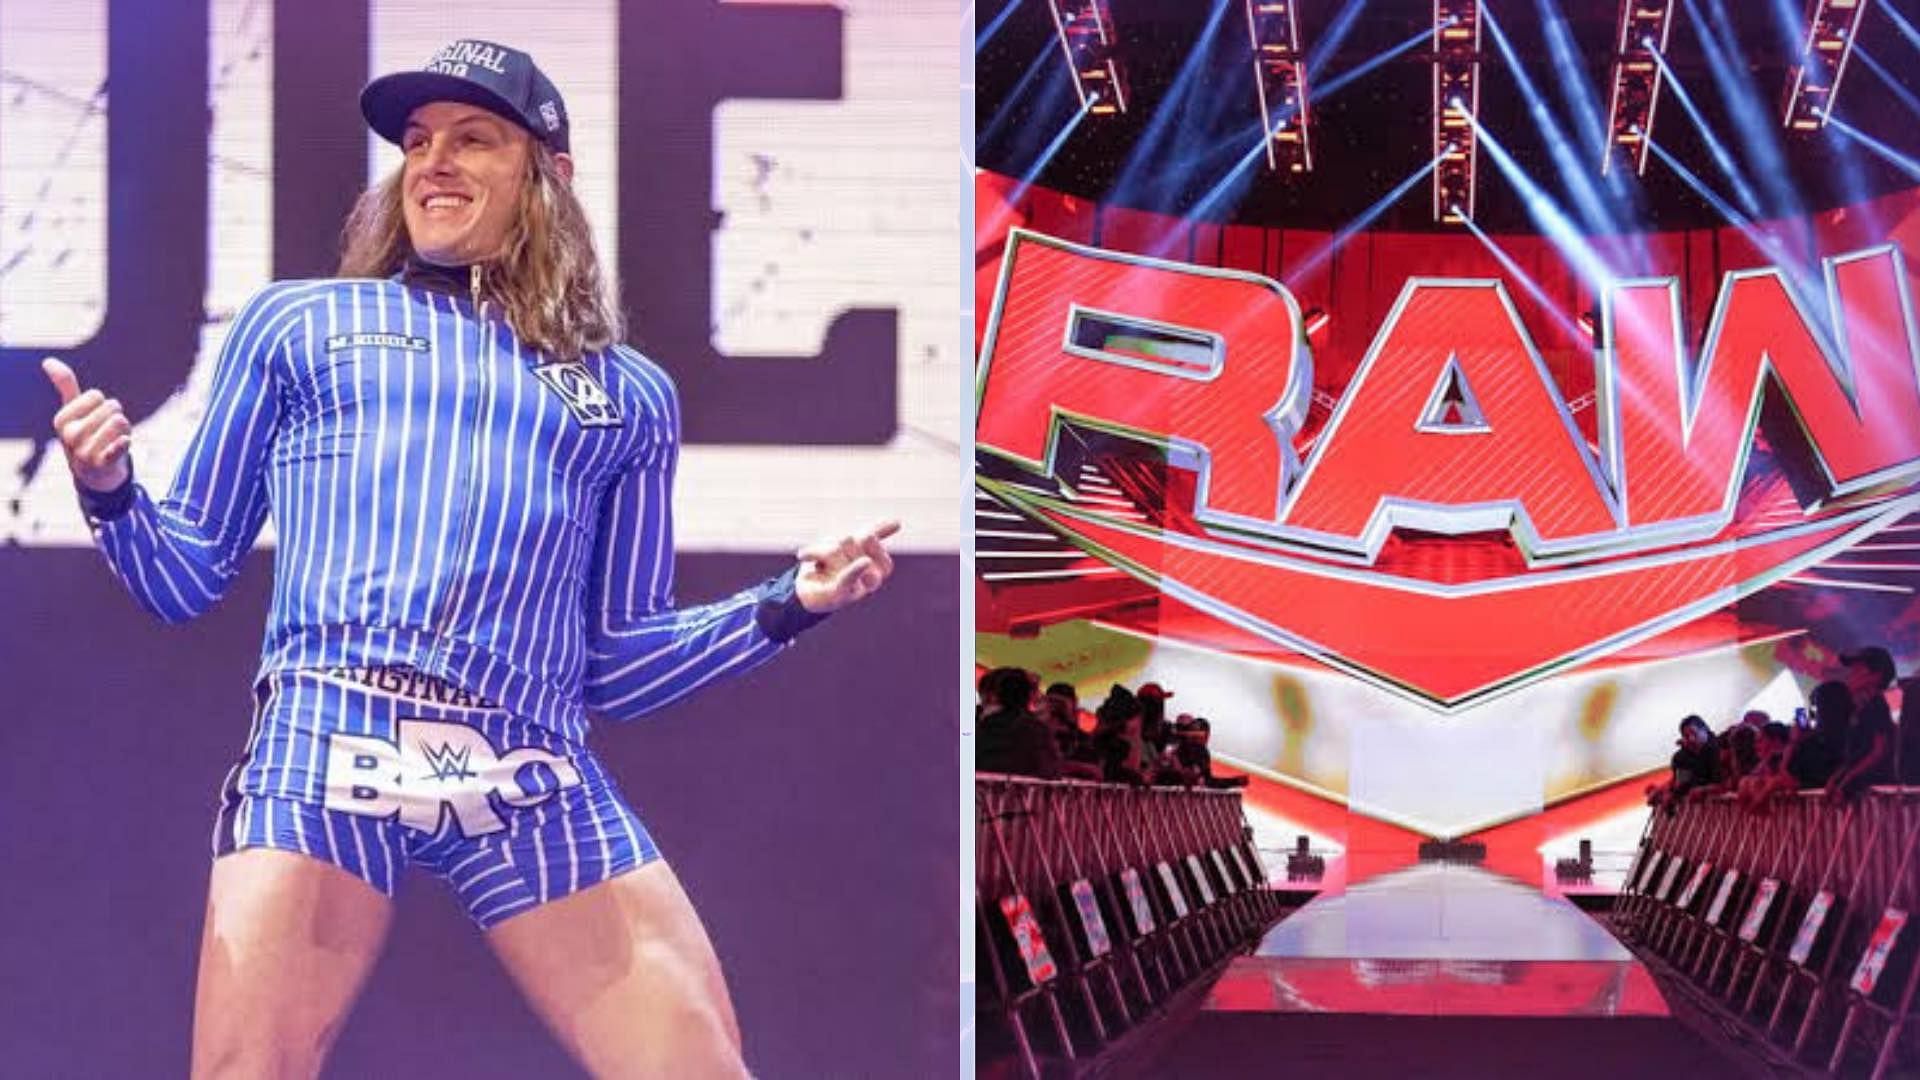 Matt Riddle will take aim at the Money in the Bank next week on RAW